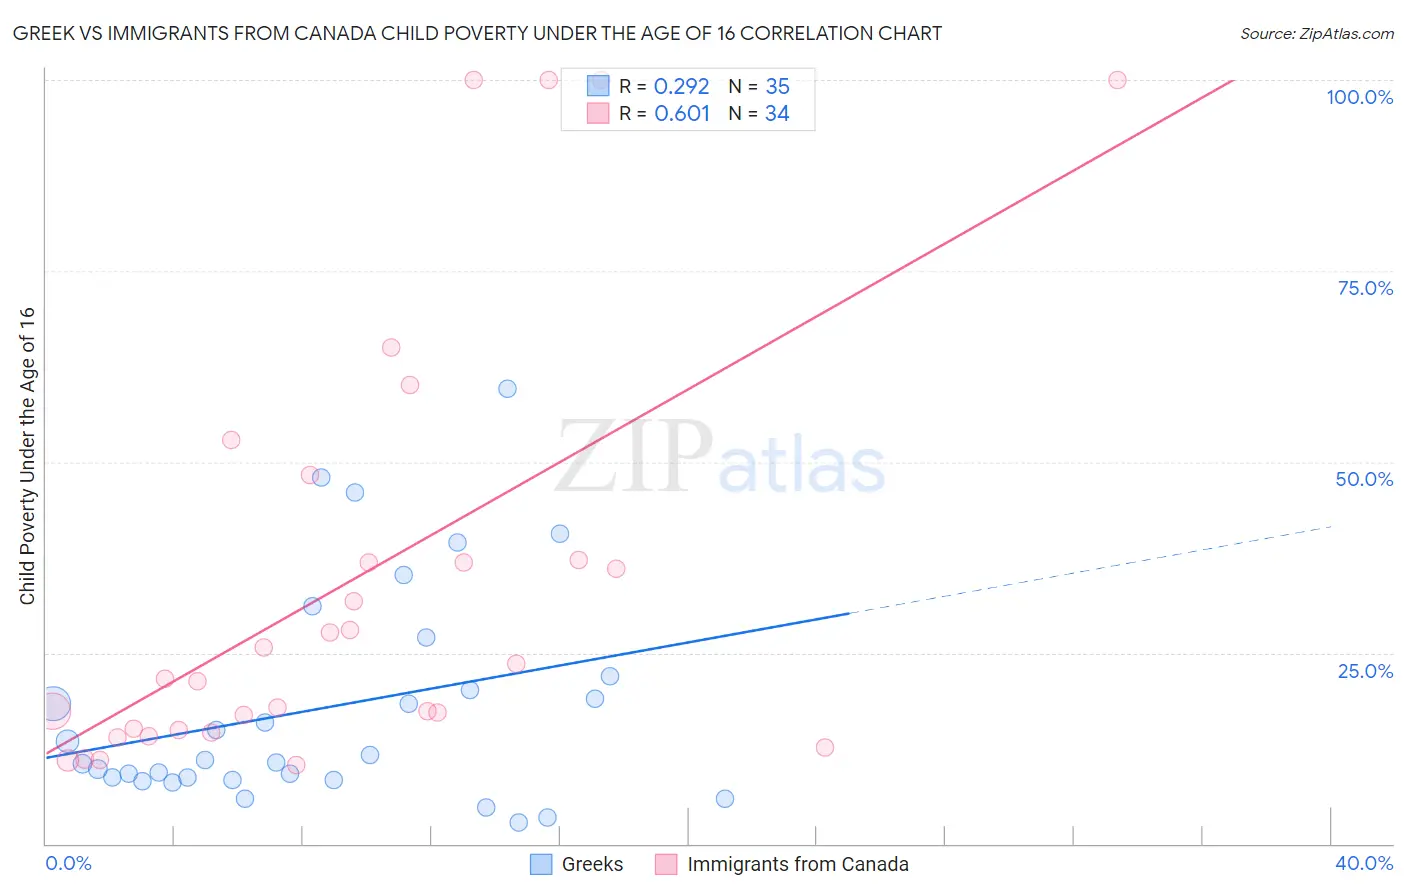 Greek vs Immigrants from Canada Child Poverty Under the Age of 16